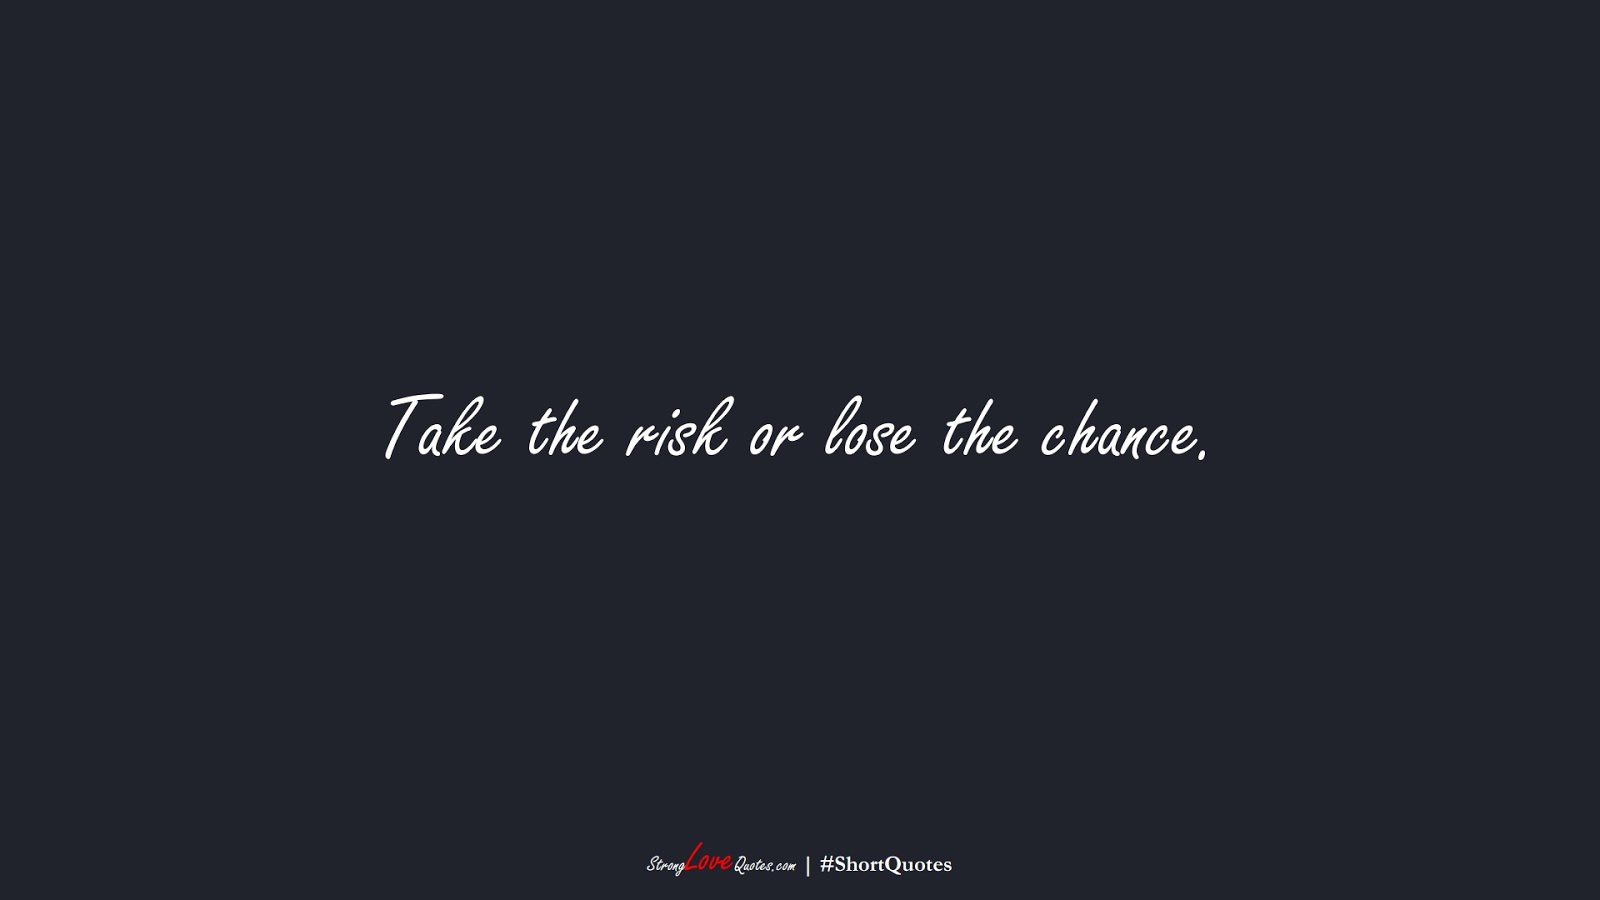 Take the risk or lose the chance.FALSE